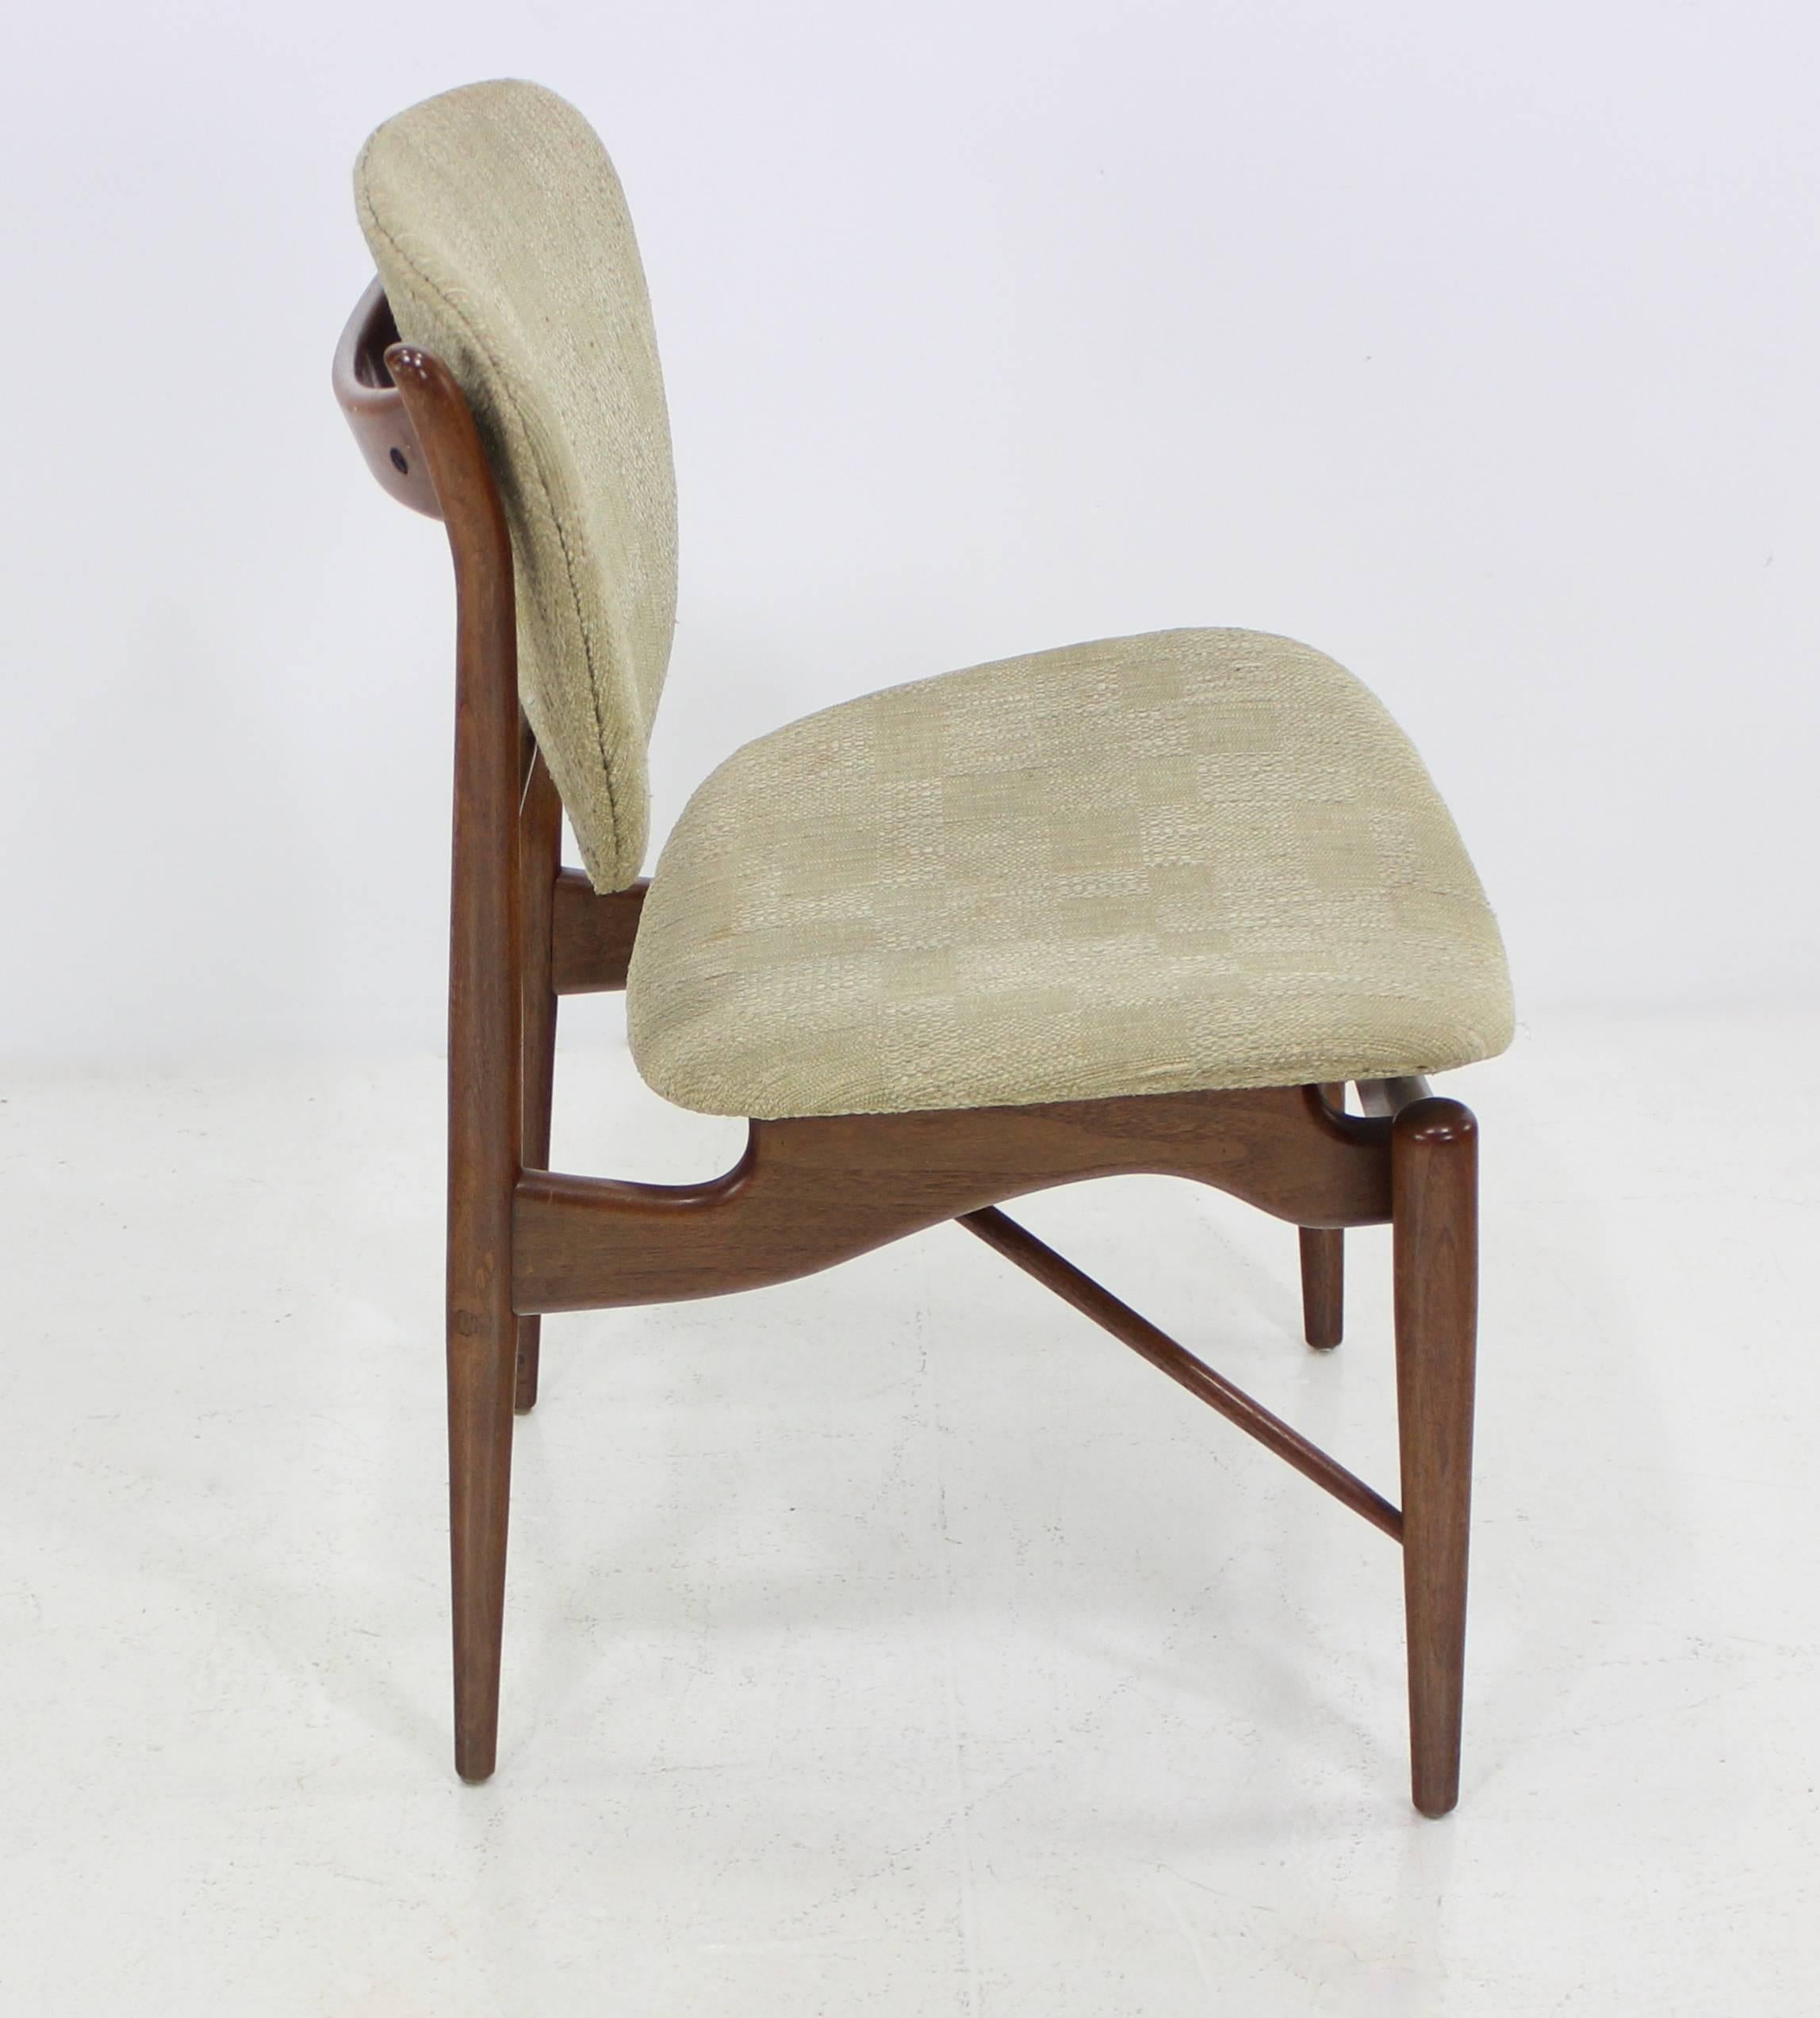 Five Danish modern dining chairs designed by Finn Juhl. 
Baker, maker.
Beautifully crafted teak frames with original upholstery.
As found condition.
Matchless quality and price. 
Low freight, quick ship. 

        